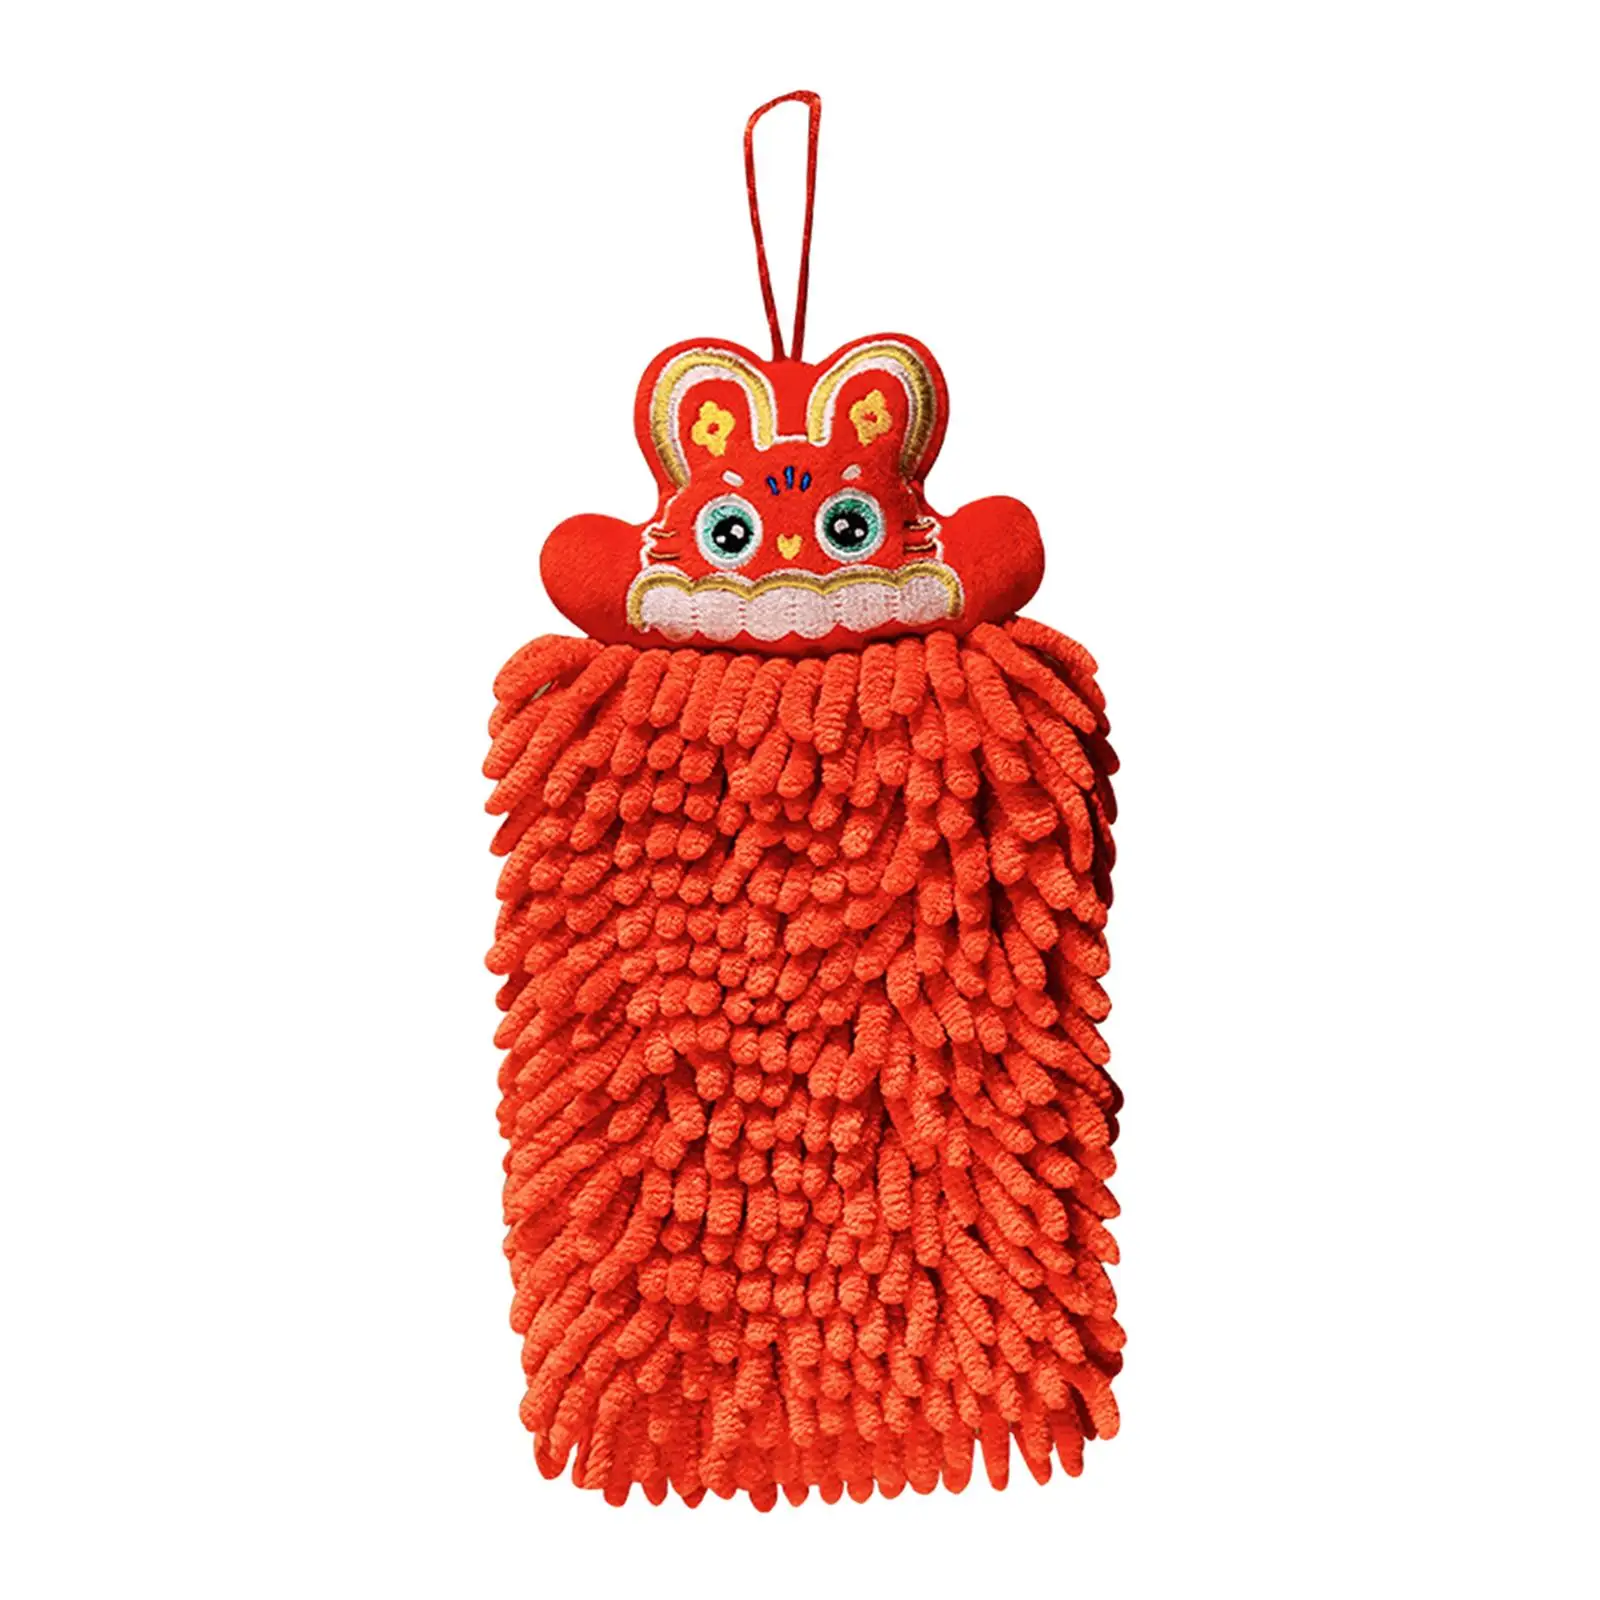 Chenille Soft Hanging Hand Towels Wipe hand Drying Chenille with Hanging Loop Bunny Absorbent Soft Towels for Bathroom